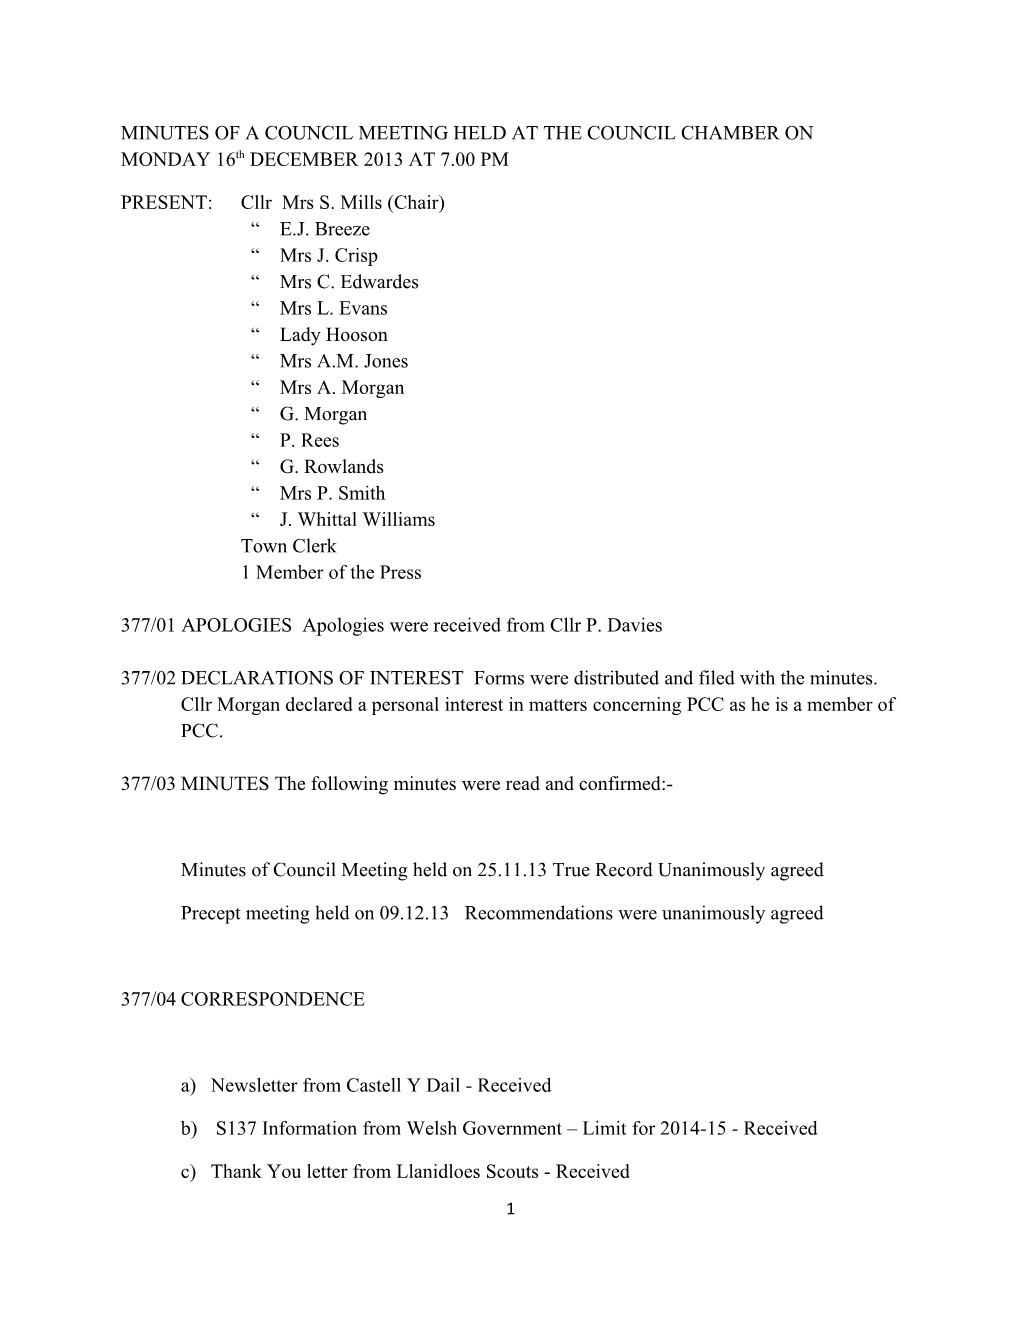 MINUTES of a COUNCIL MEETING HELD at the COUNCIL CHAMBER on MONDAY 16Th DECEMBER2013 at 7.00 PM